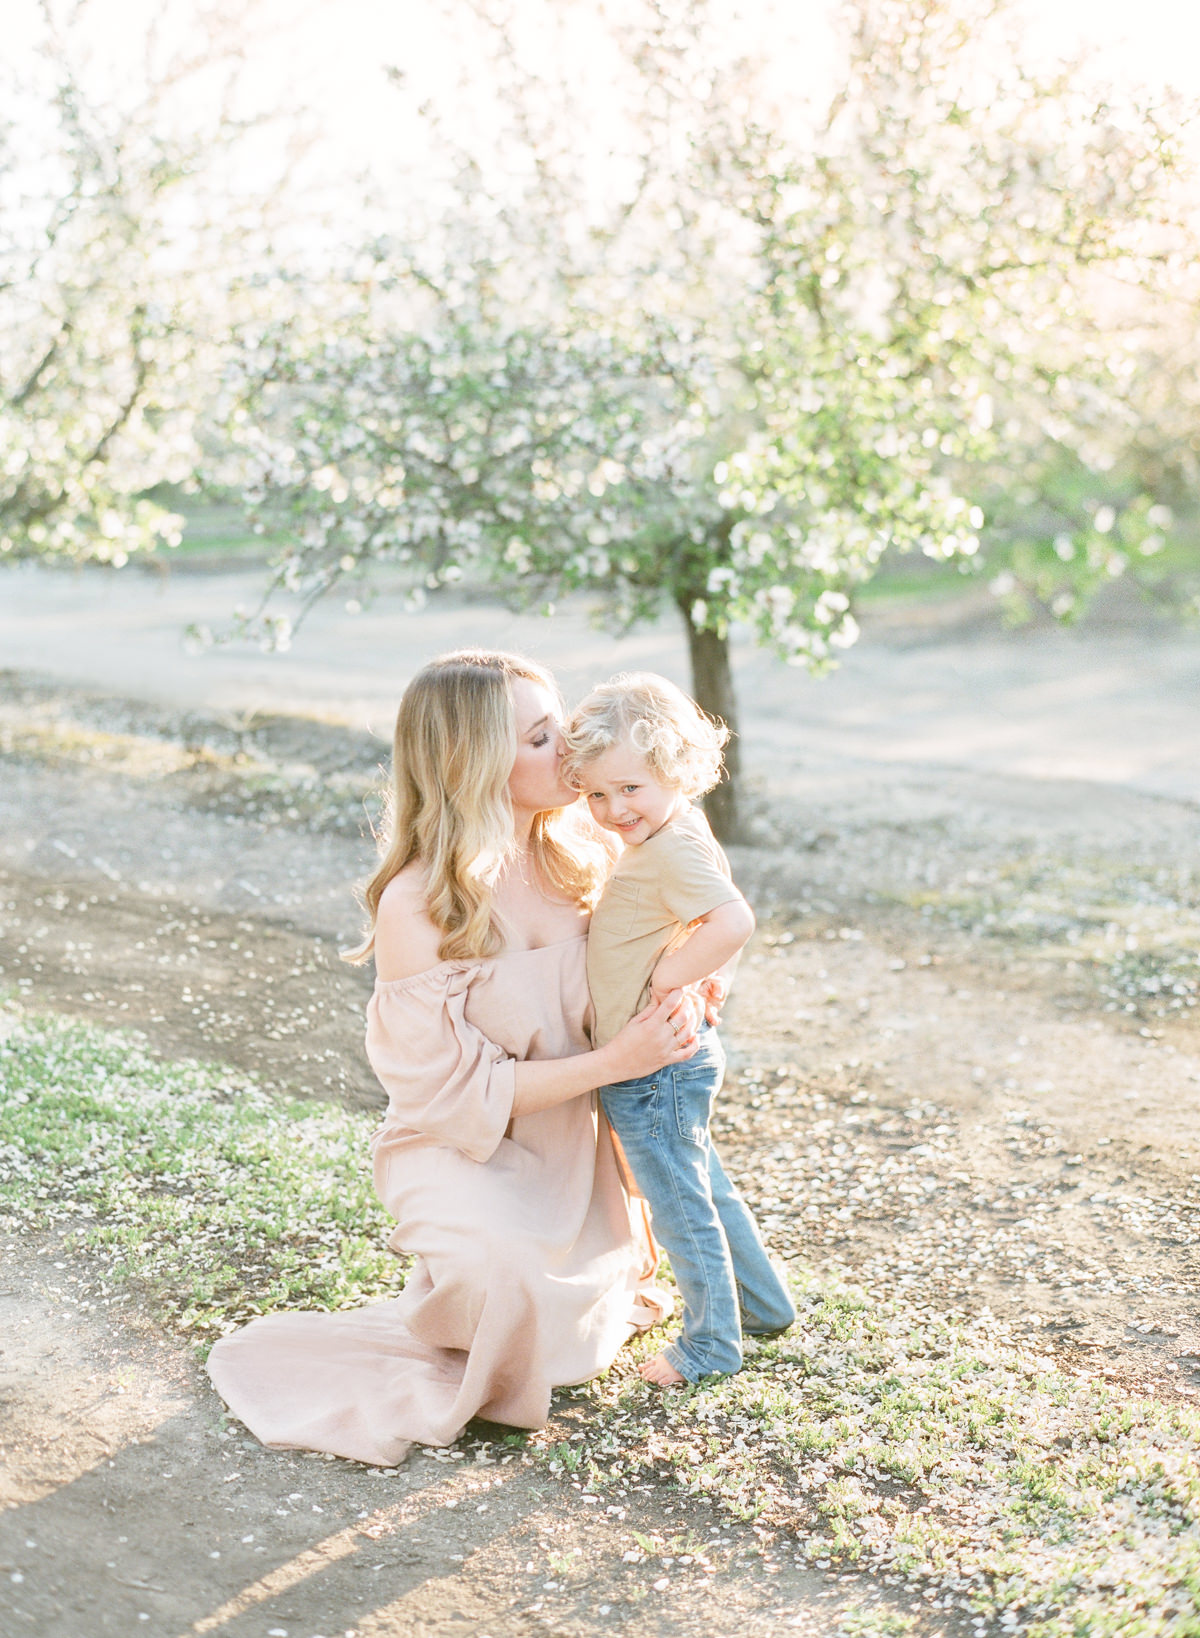 A Blossom-Filled, Central Valley Family Session | Kent Avenue Photography